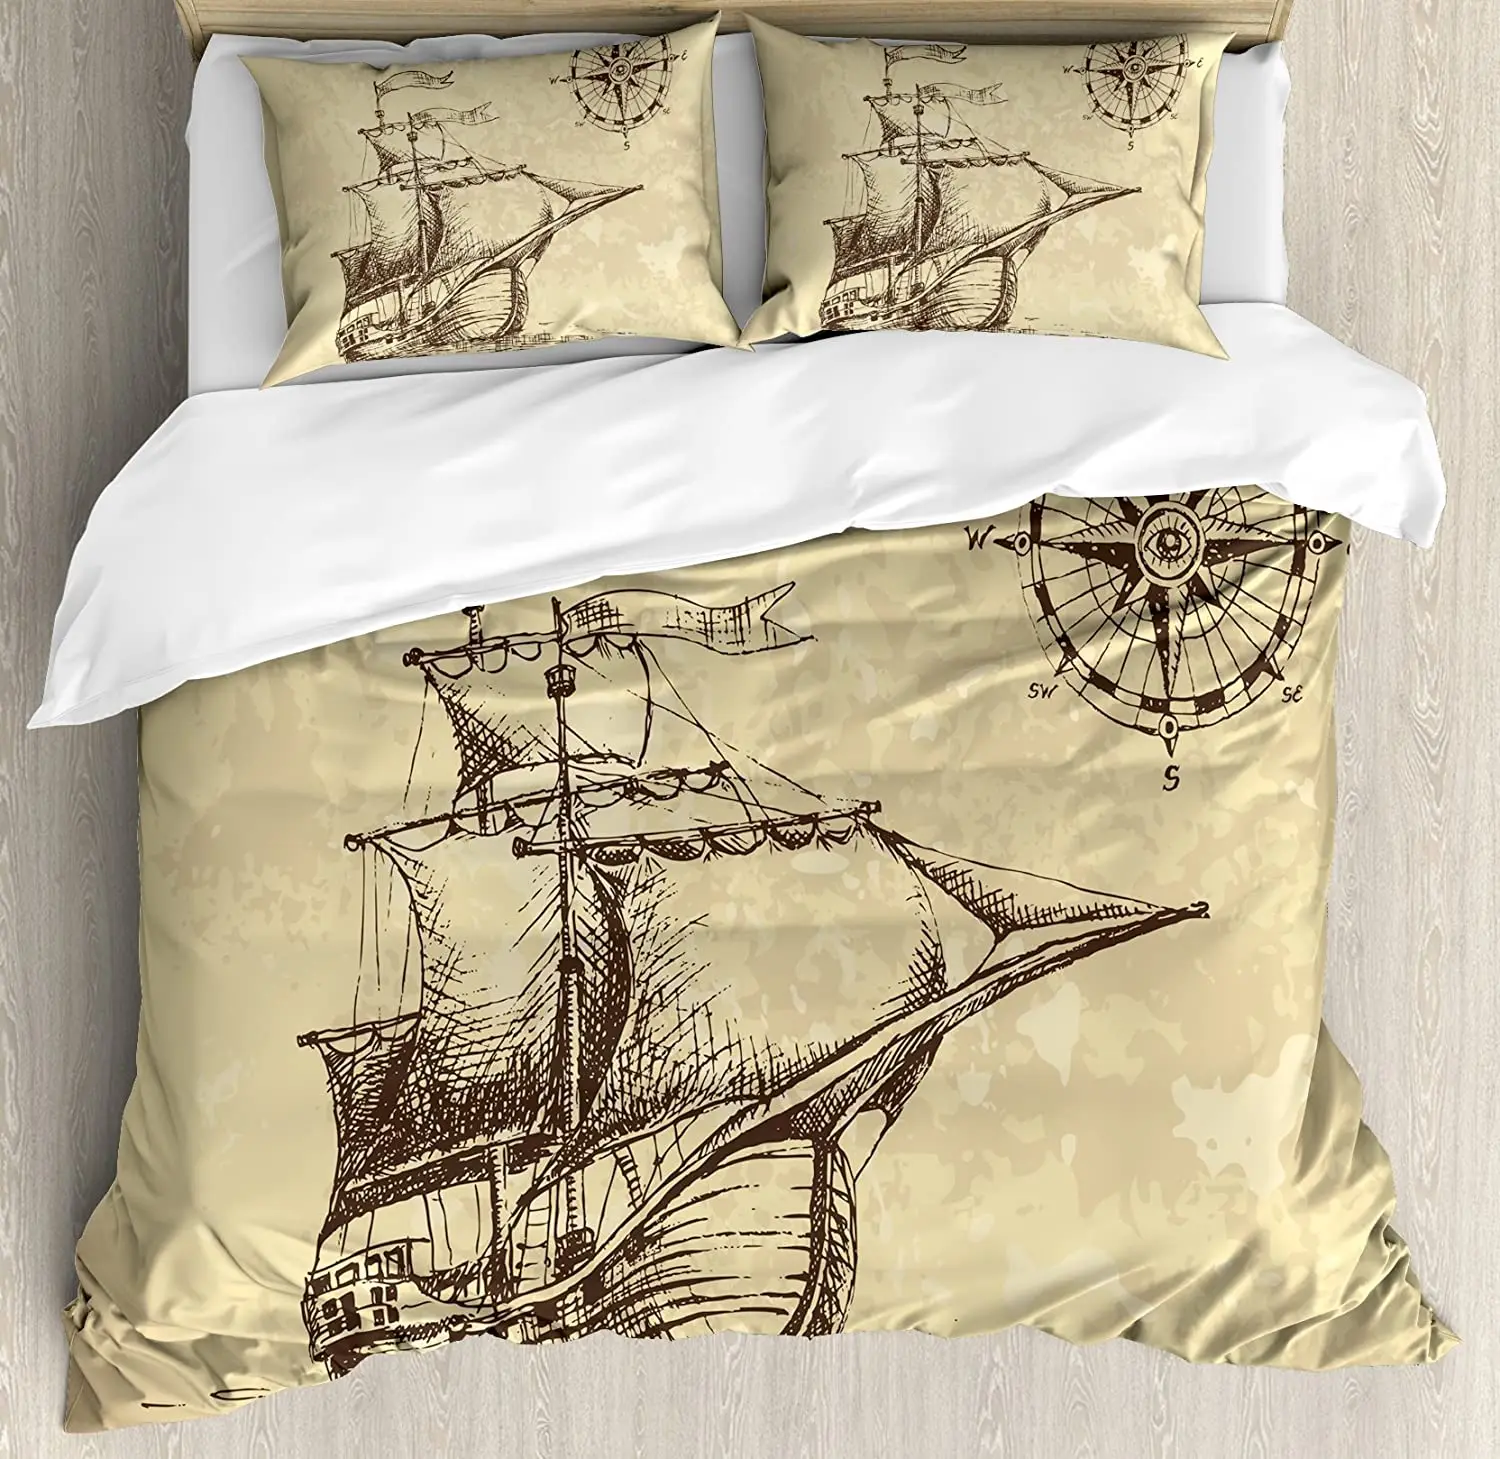 

Compass 3pcs Bedding Set Hand Drawn Old Paper Style Background A Duvet Cover Set Bed Set Quilt Cover Pillow Case Comforter Cover